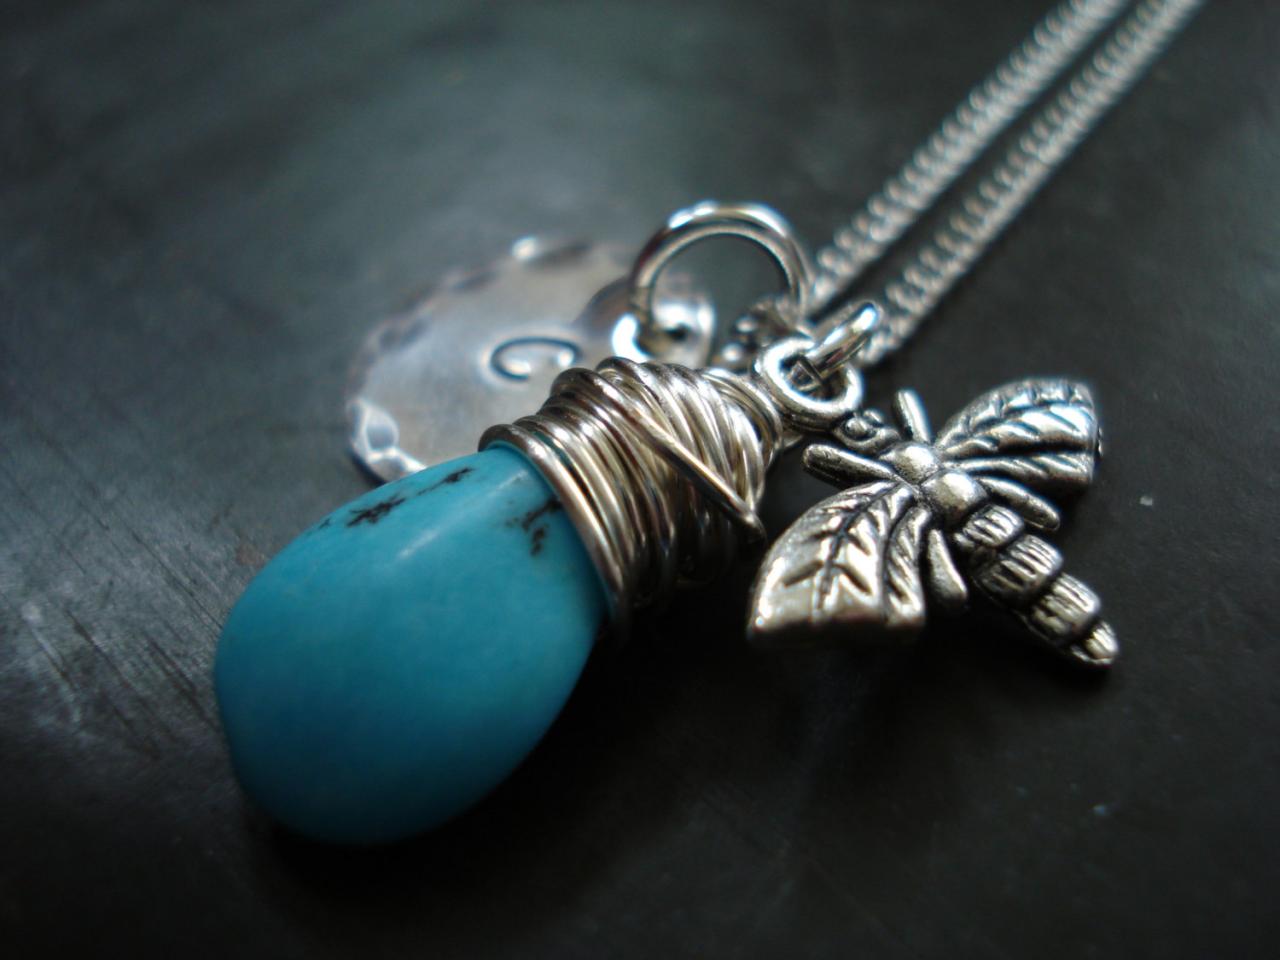 Turquoise Stone Necklace, Stamped Monogramed Charm, Bee Charm, Hand Made Personalized Necklace, Gift Under 50 Dollars